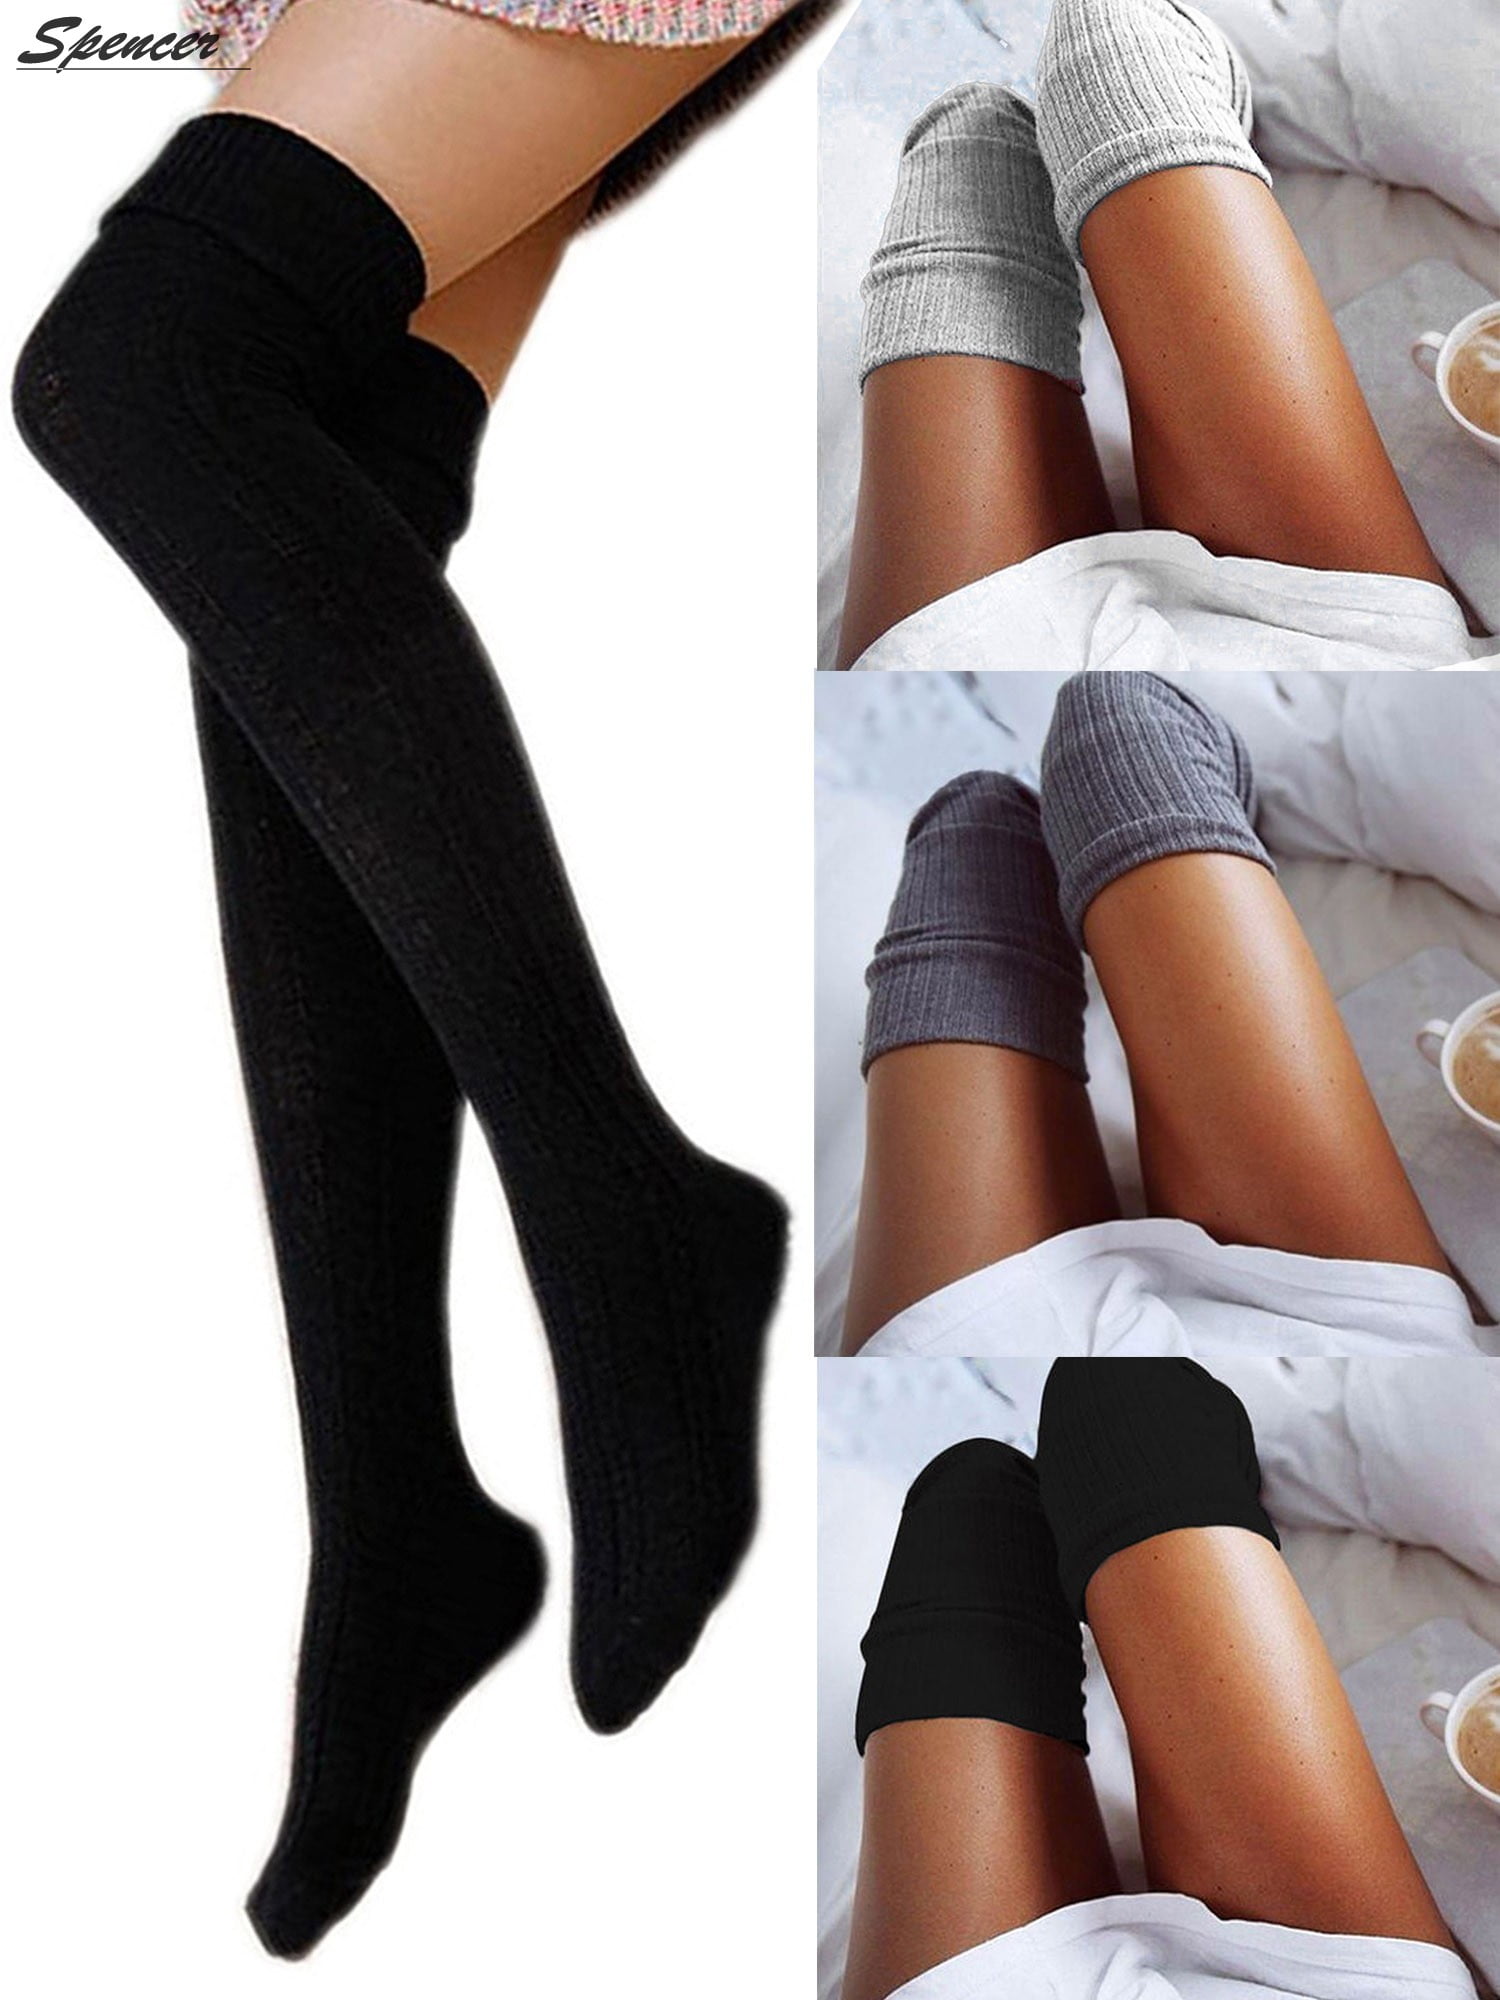 Color : Black, Size : 64cm Women Long Knit Knee Socks Thigh Highs Hose Stockings Warm Winter Autumn Thigh High Stockings